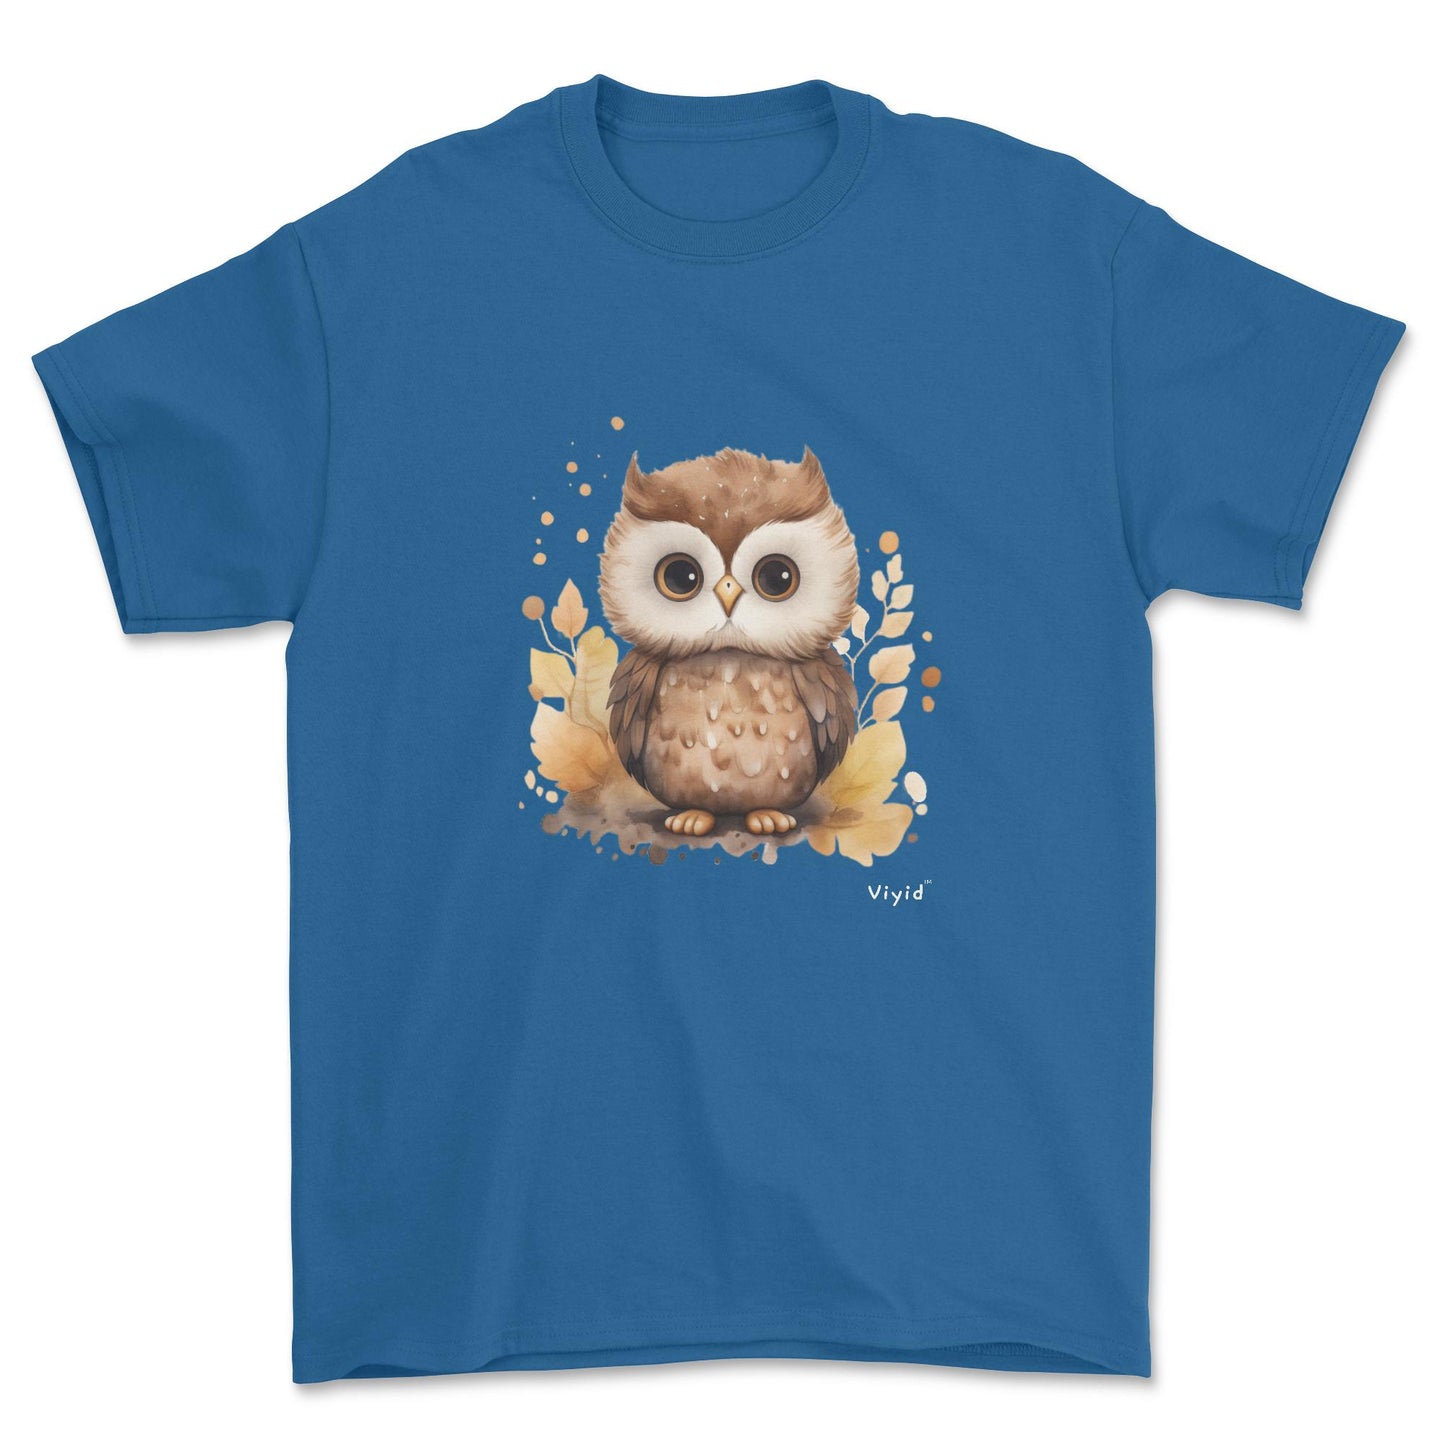 nocturnal owl youth t-shirt royal